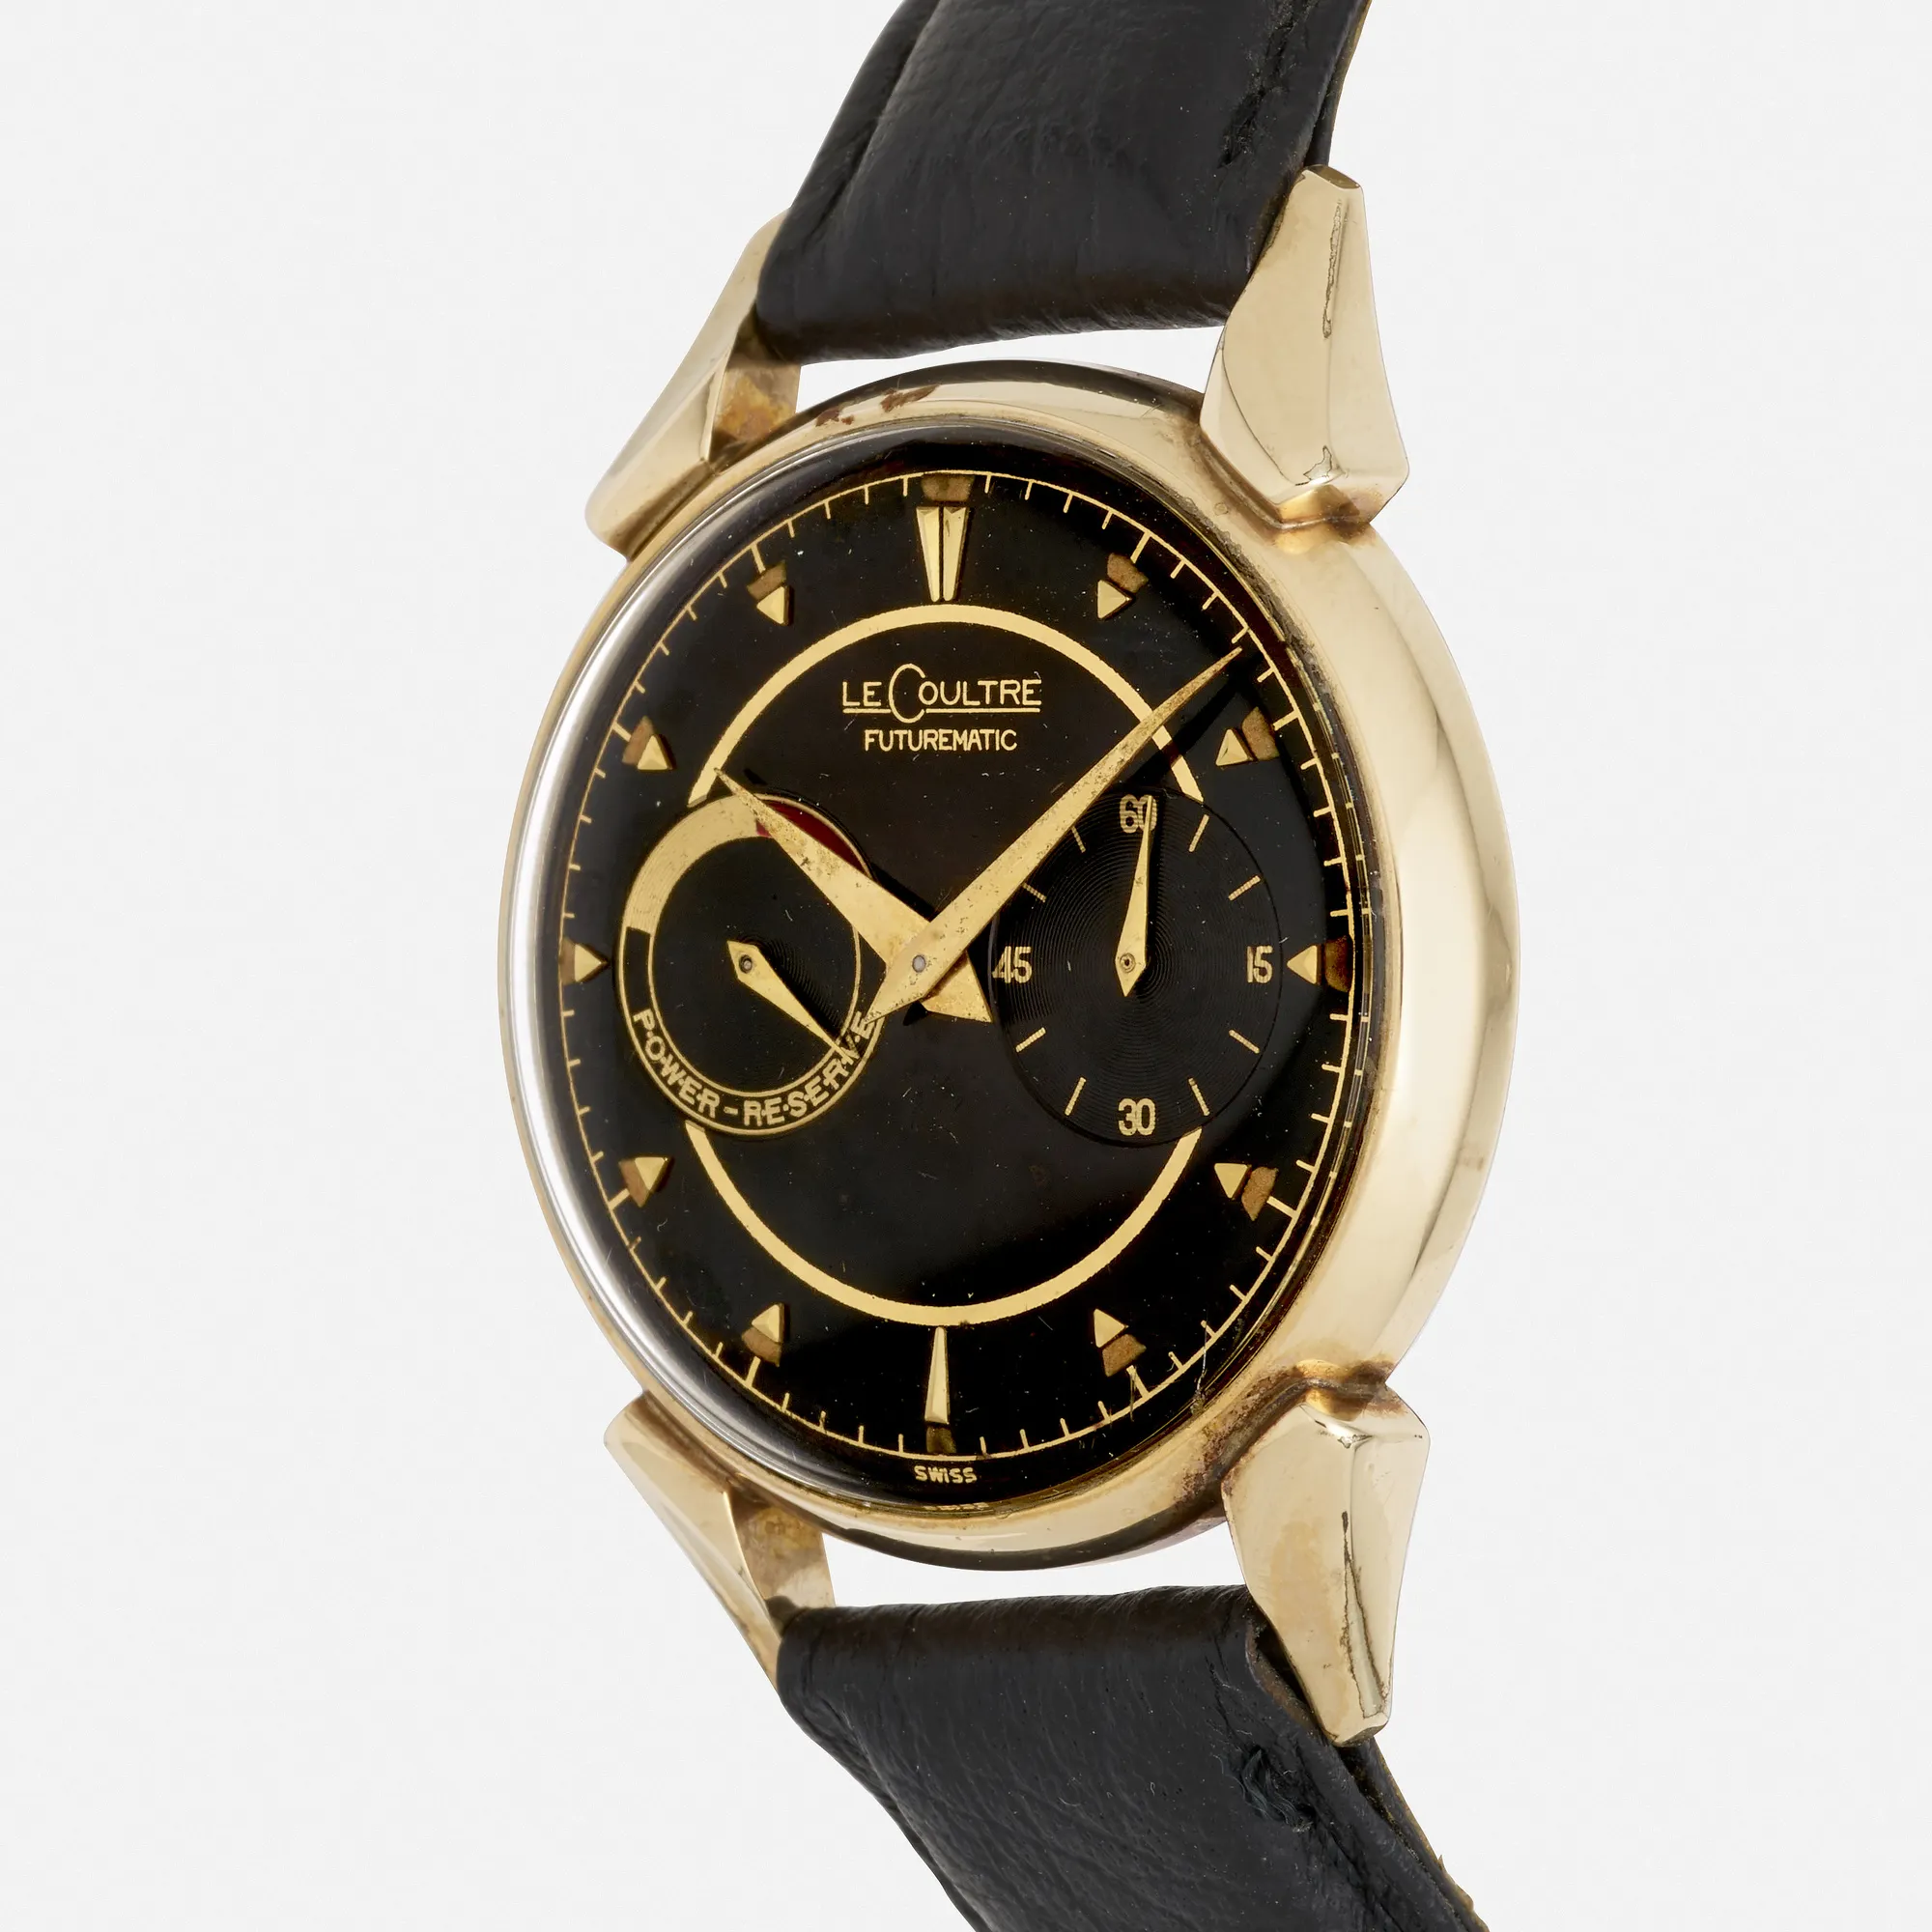 Jaeger-LeCoultre Futurematic 44mm Gold-plated Black 2